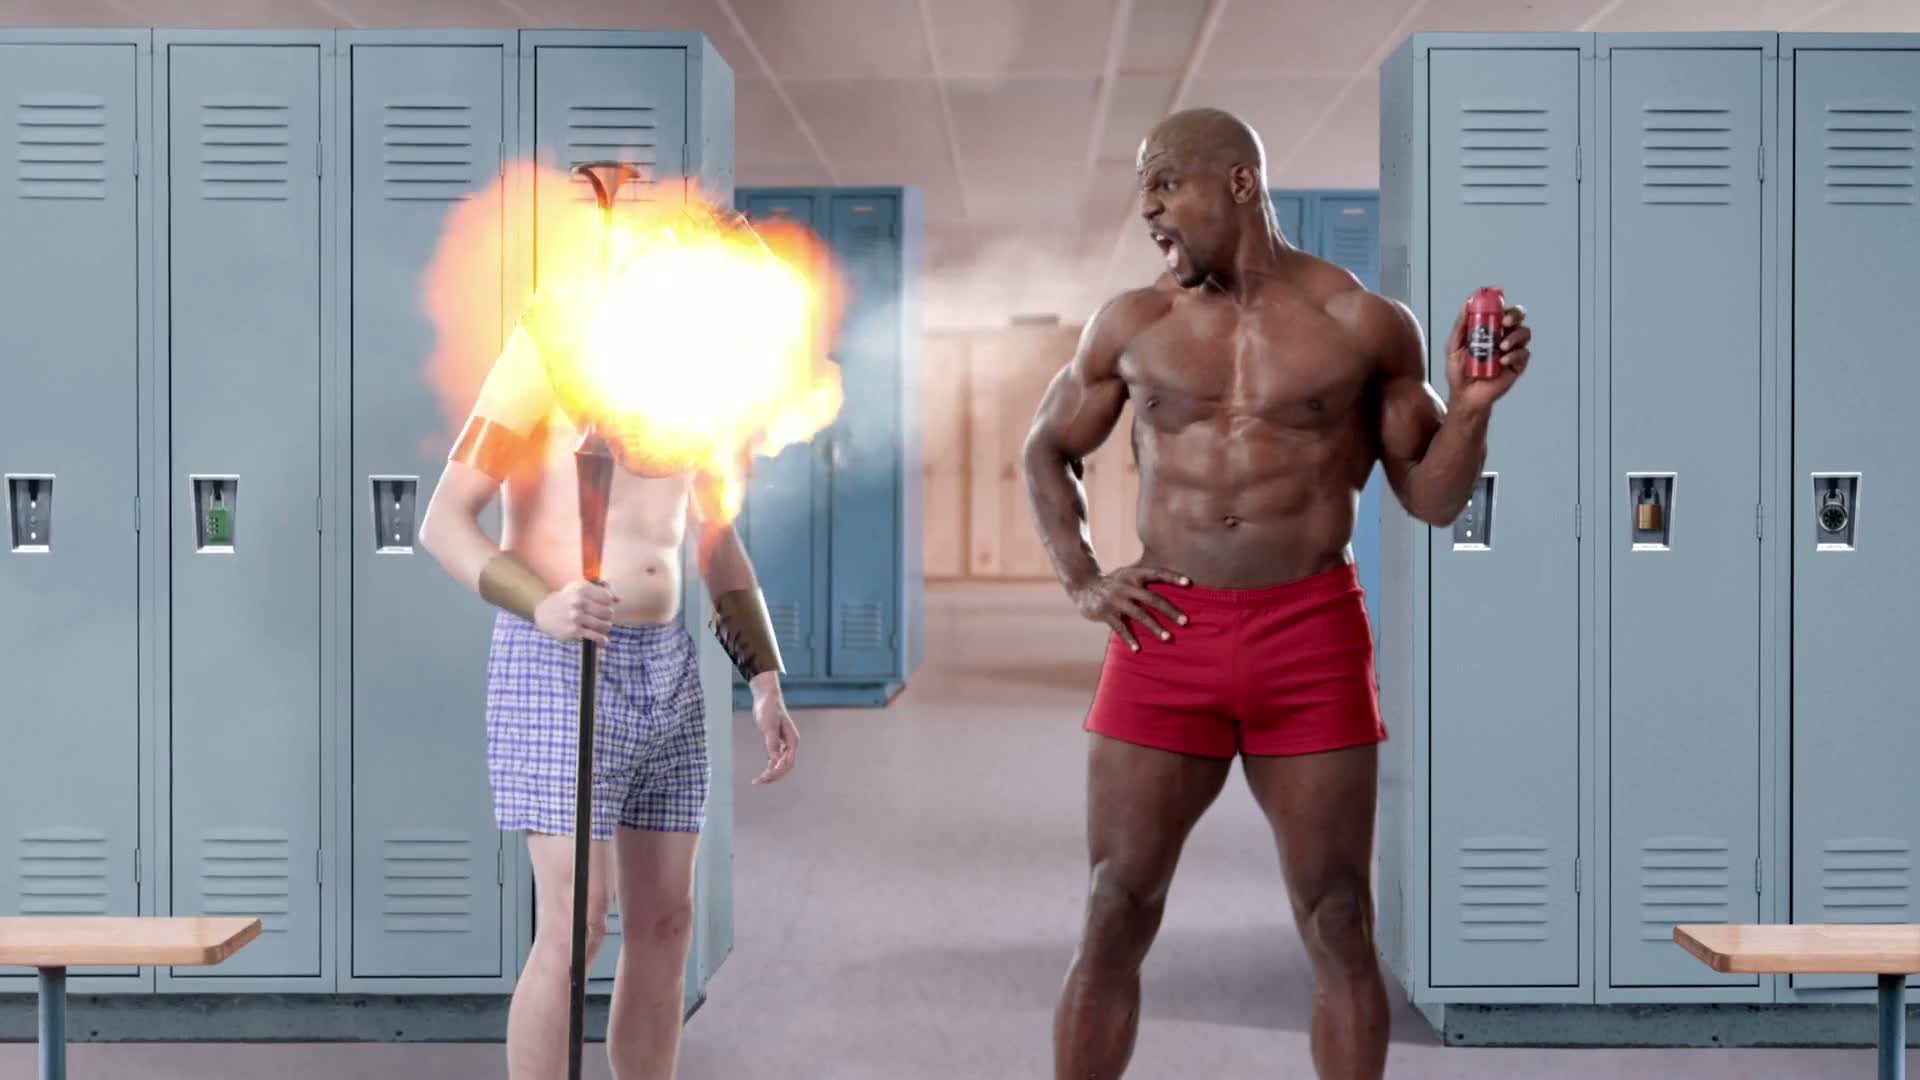 Vending Machine - Old Spice Deodorant TV Commercial Ad